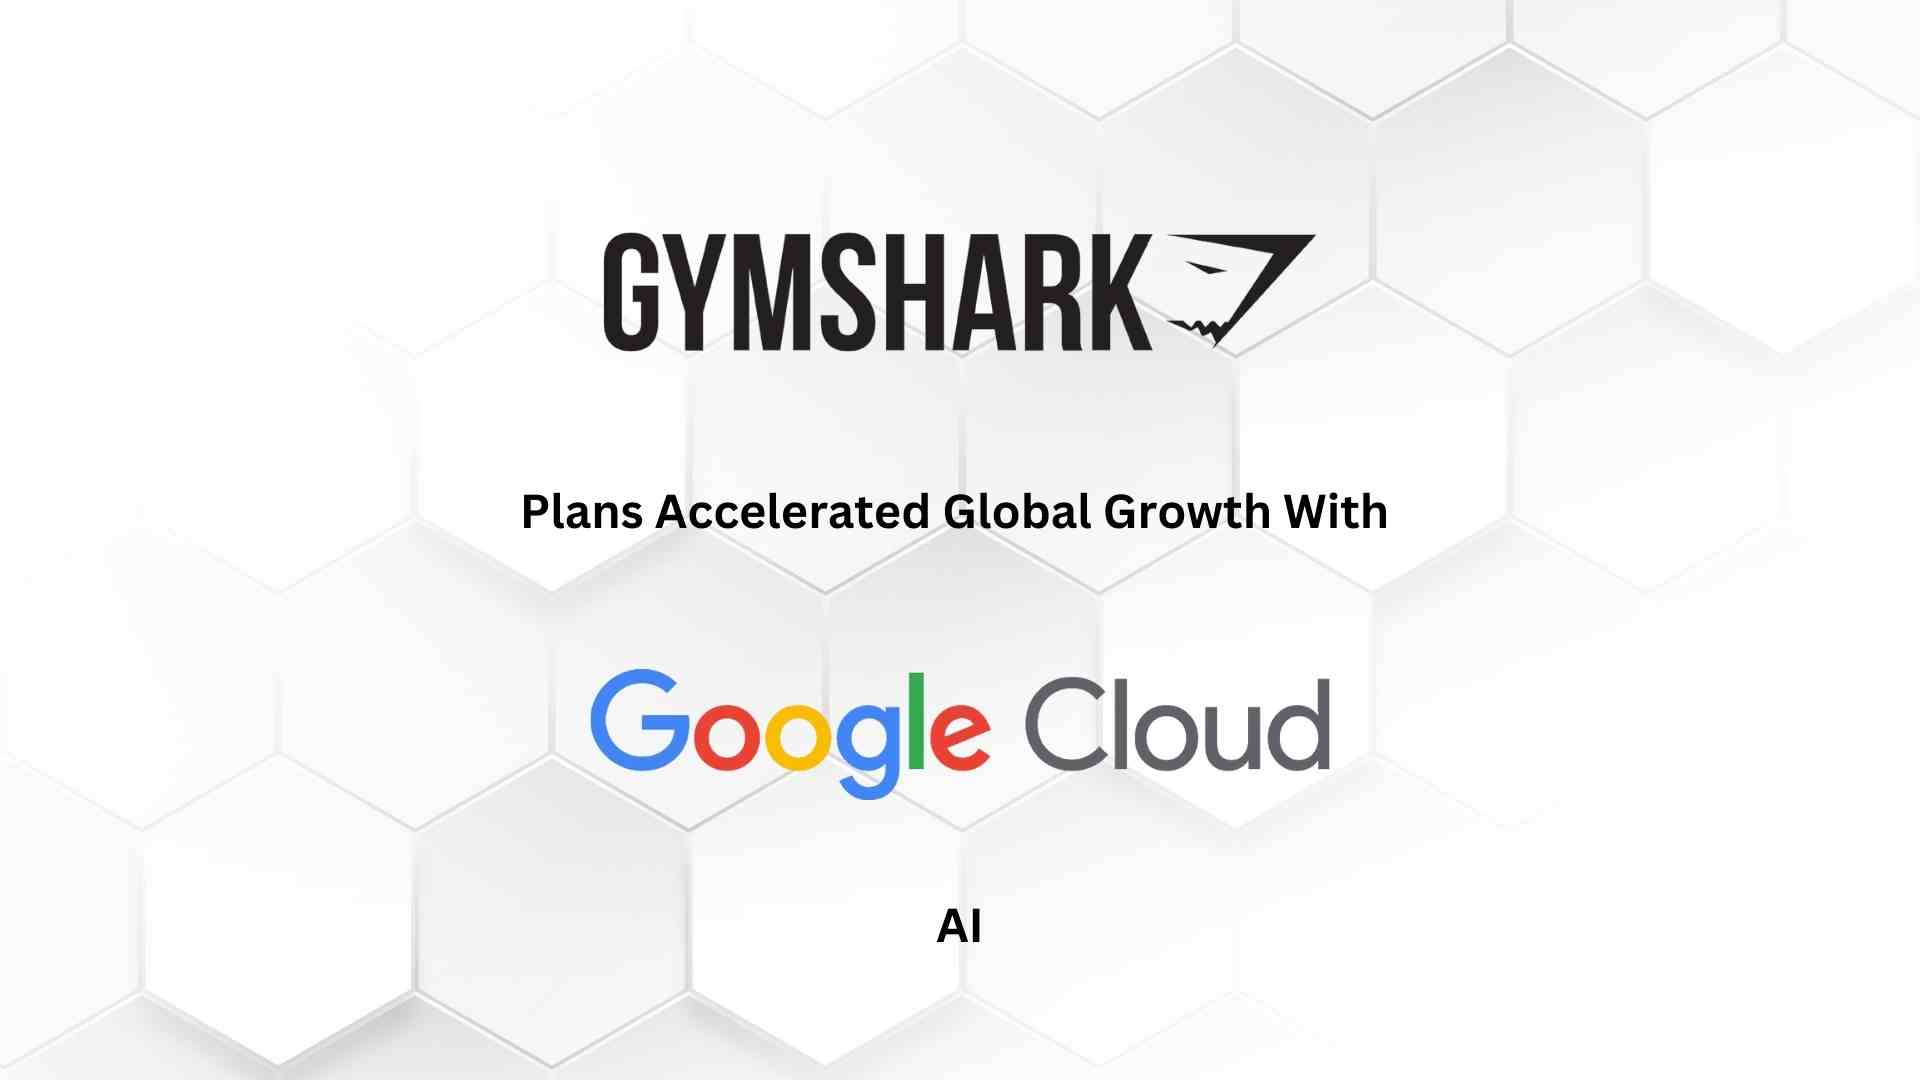 Gymshark Plans Accelerated Global Growth with Google Cloud AI